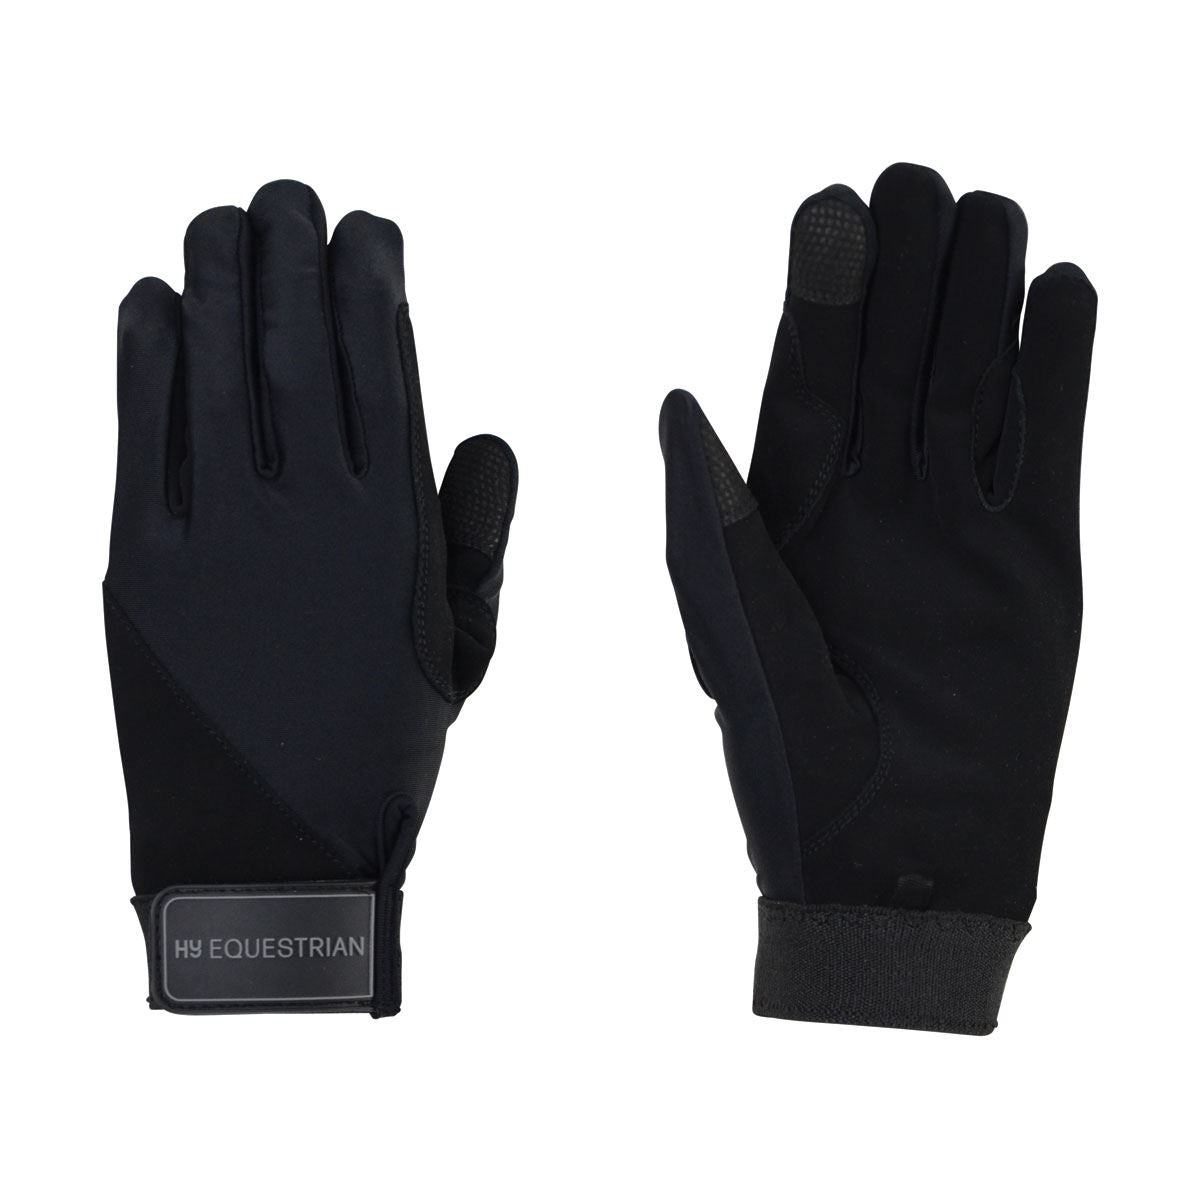 Hy Equestrian Absolute Fit Glove - Just Horse Riders